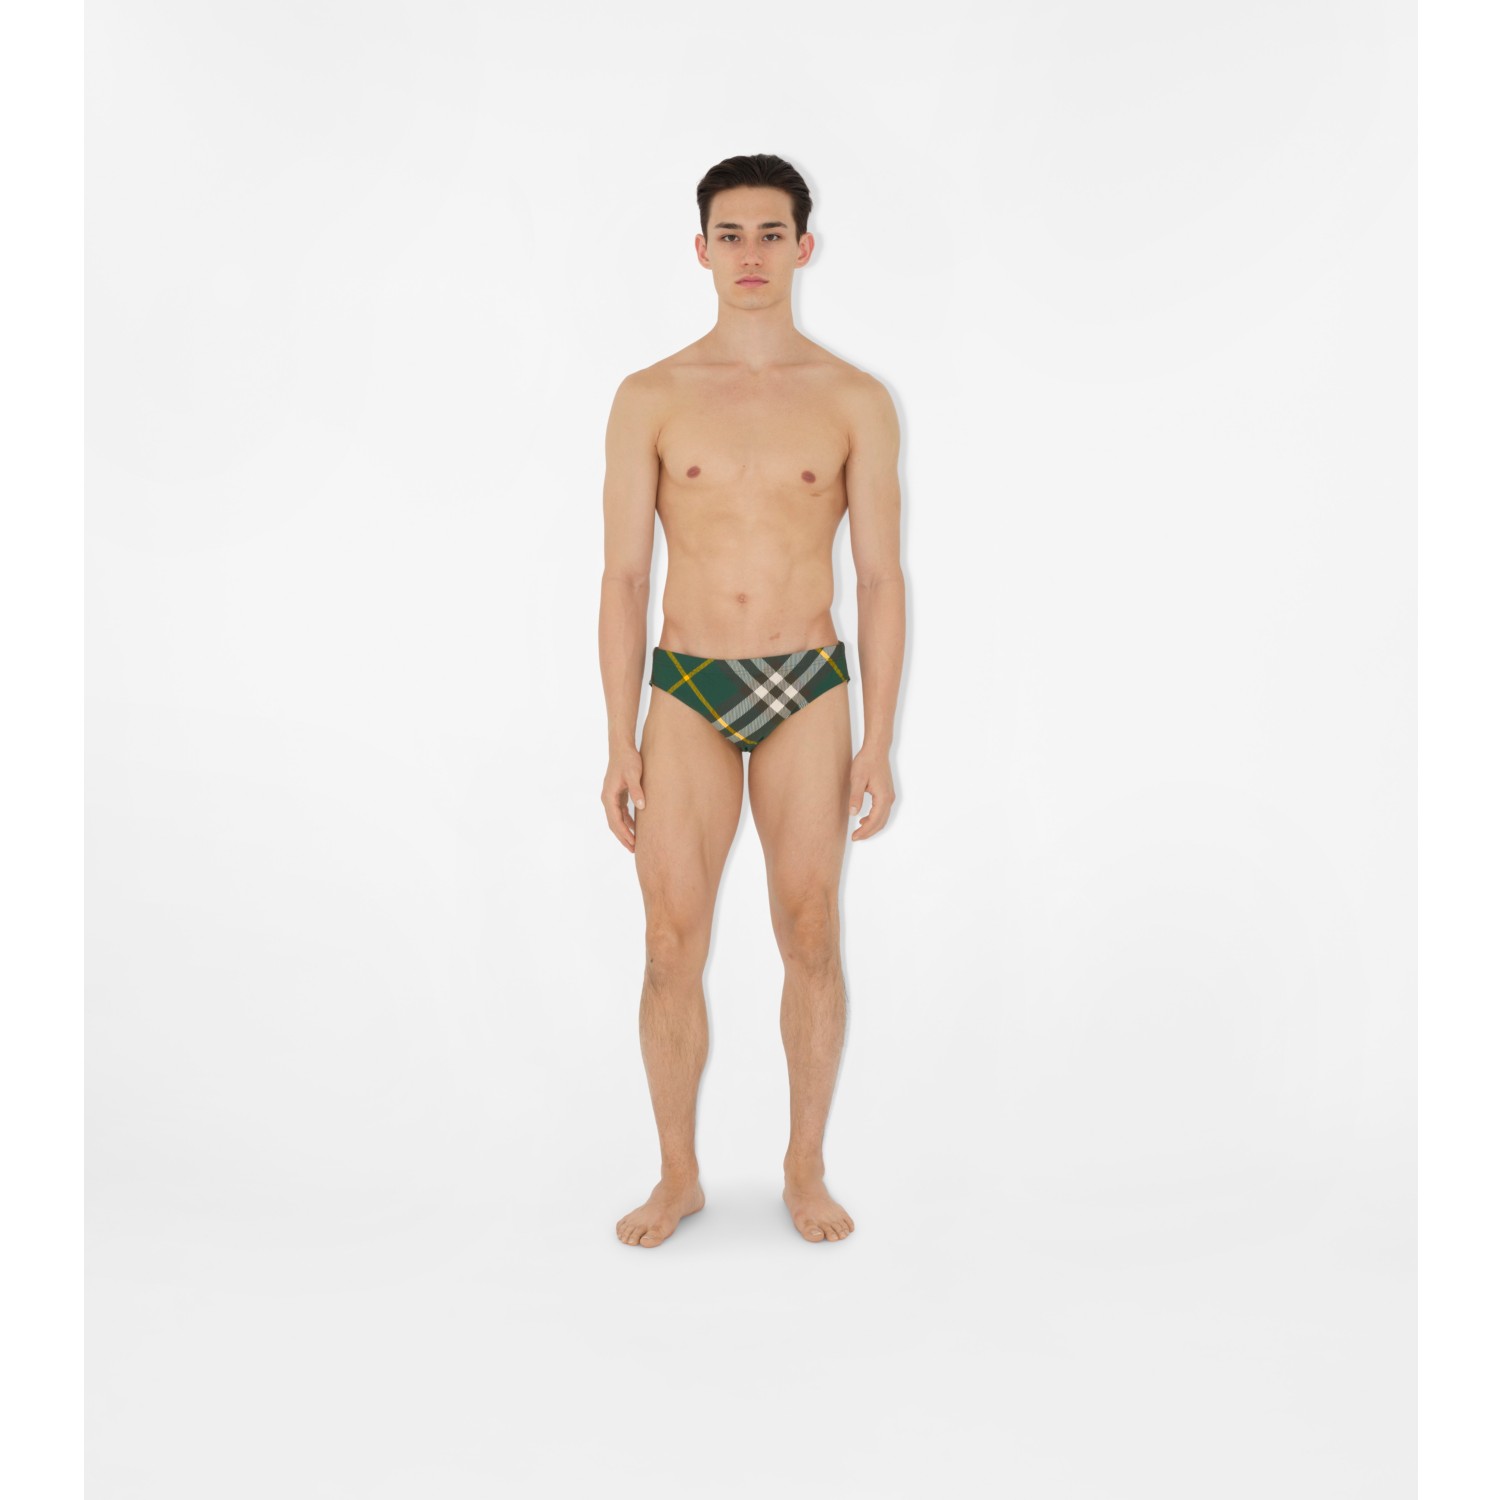 Burberry's Latest B Series Release Are Swimming Briefs